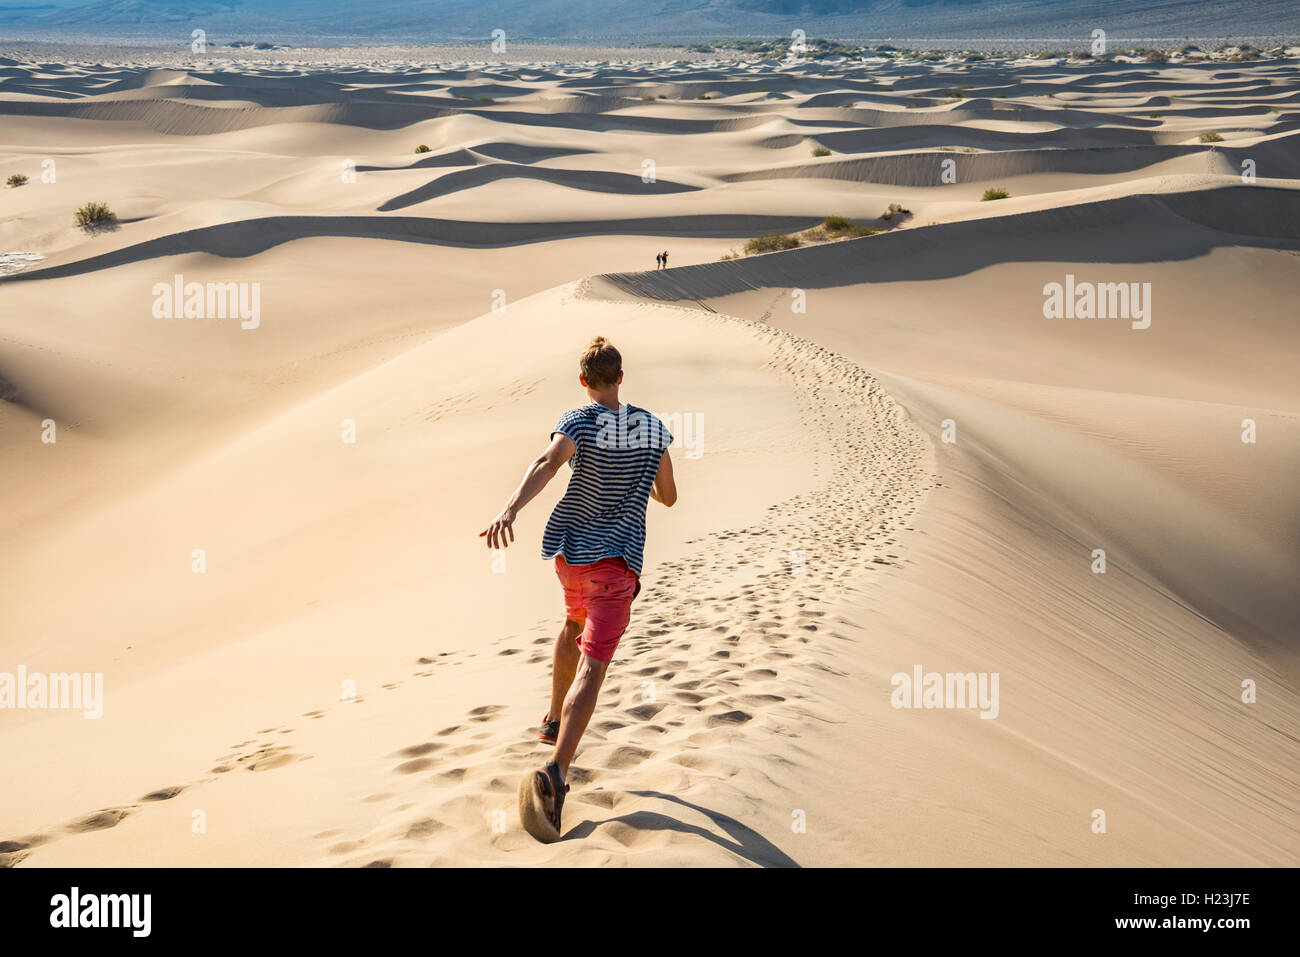 Young man, tourist running down sand dune, Mesquite Flat Sand Dunes, Death Valley, Death Valley National Park, California, USA Stock Photo